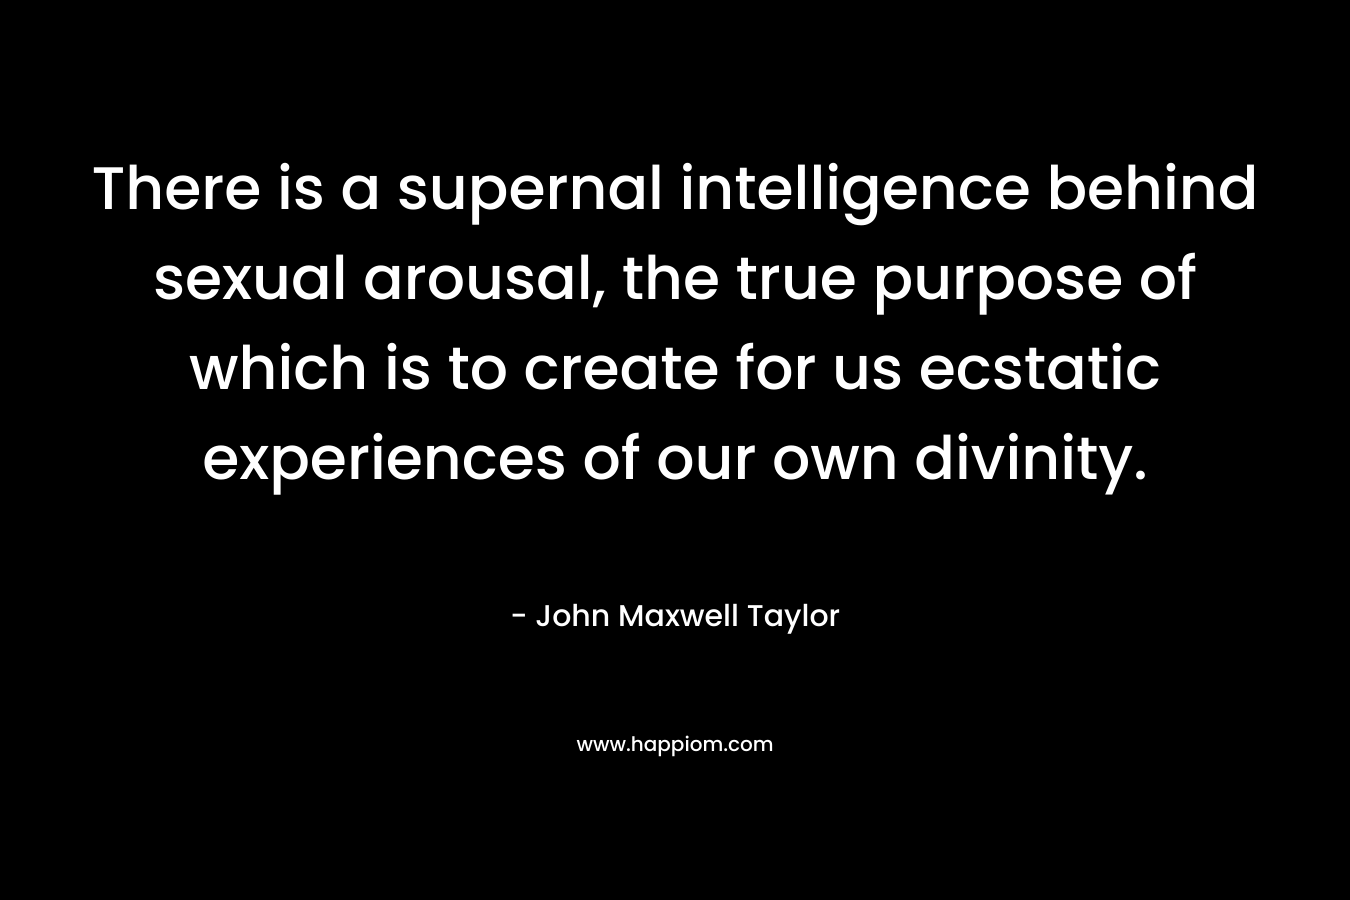 There is a supernal intelligence behind sexual arousal, the true purpose of which is to create for us ecstatic experiences of our own divinity. – John Maxwell Taylor